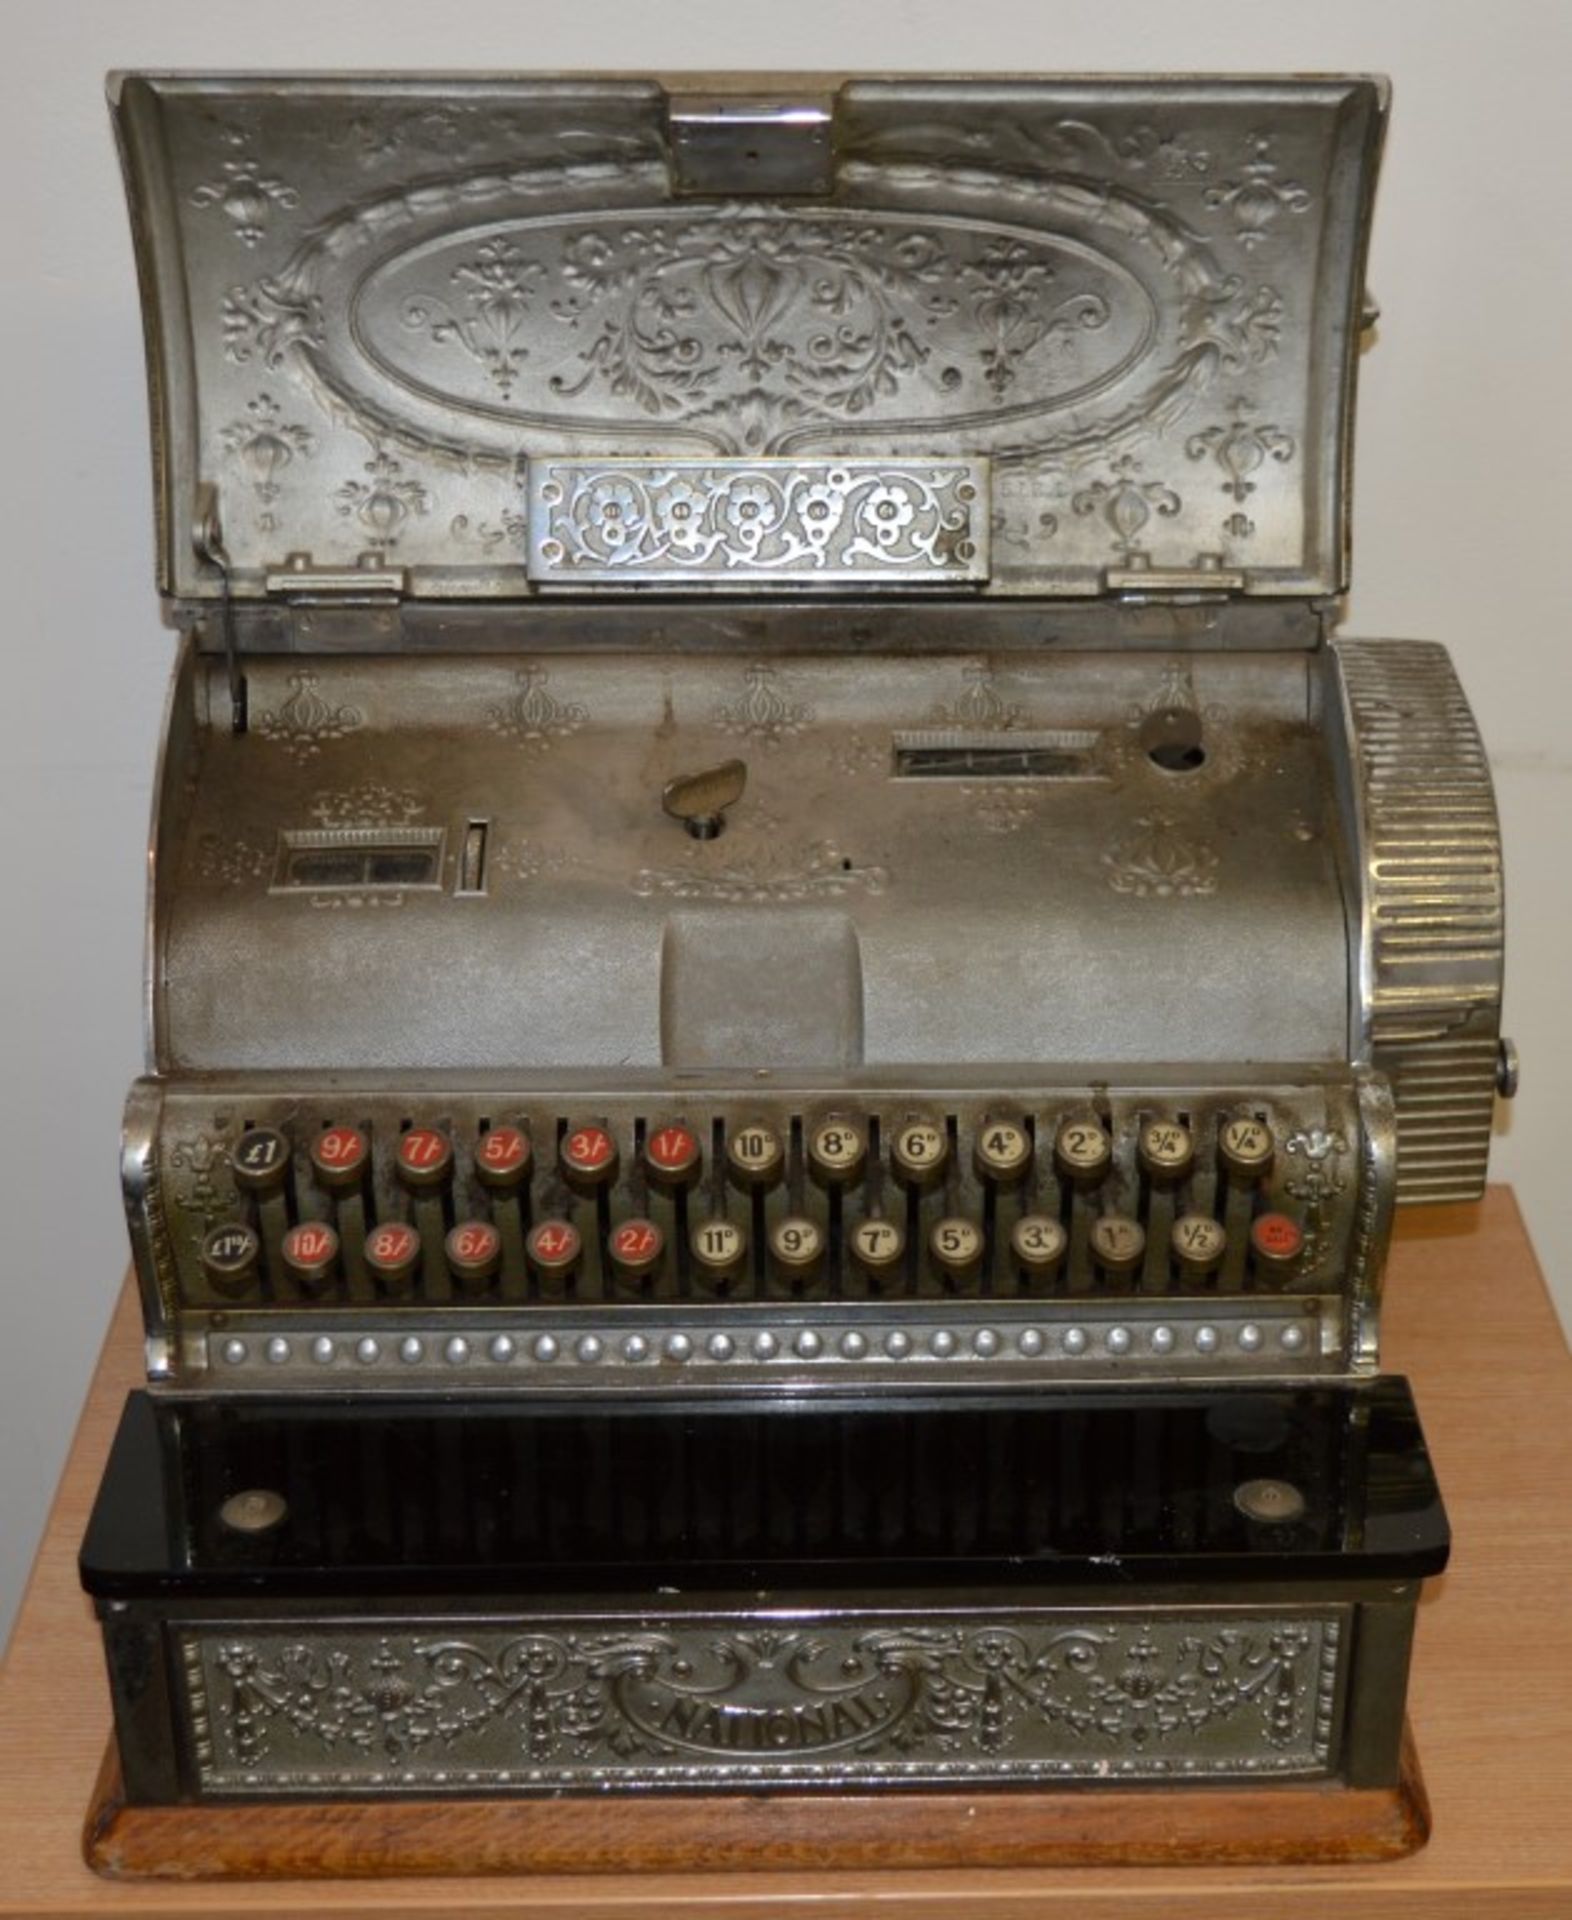 1 x Exquisite Antique National Cash Register - Circa Early 1900's - Perfect For Barbers Shop, Tattoo - Image 14 of 35